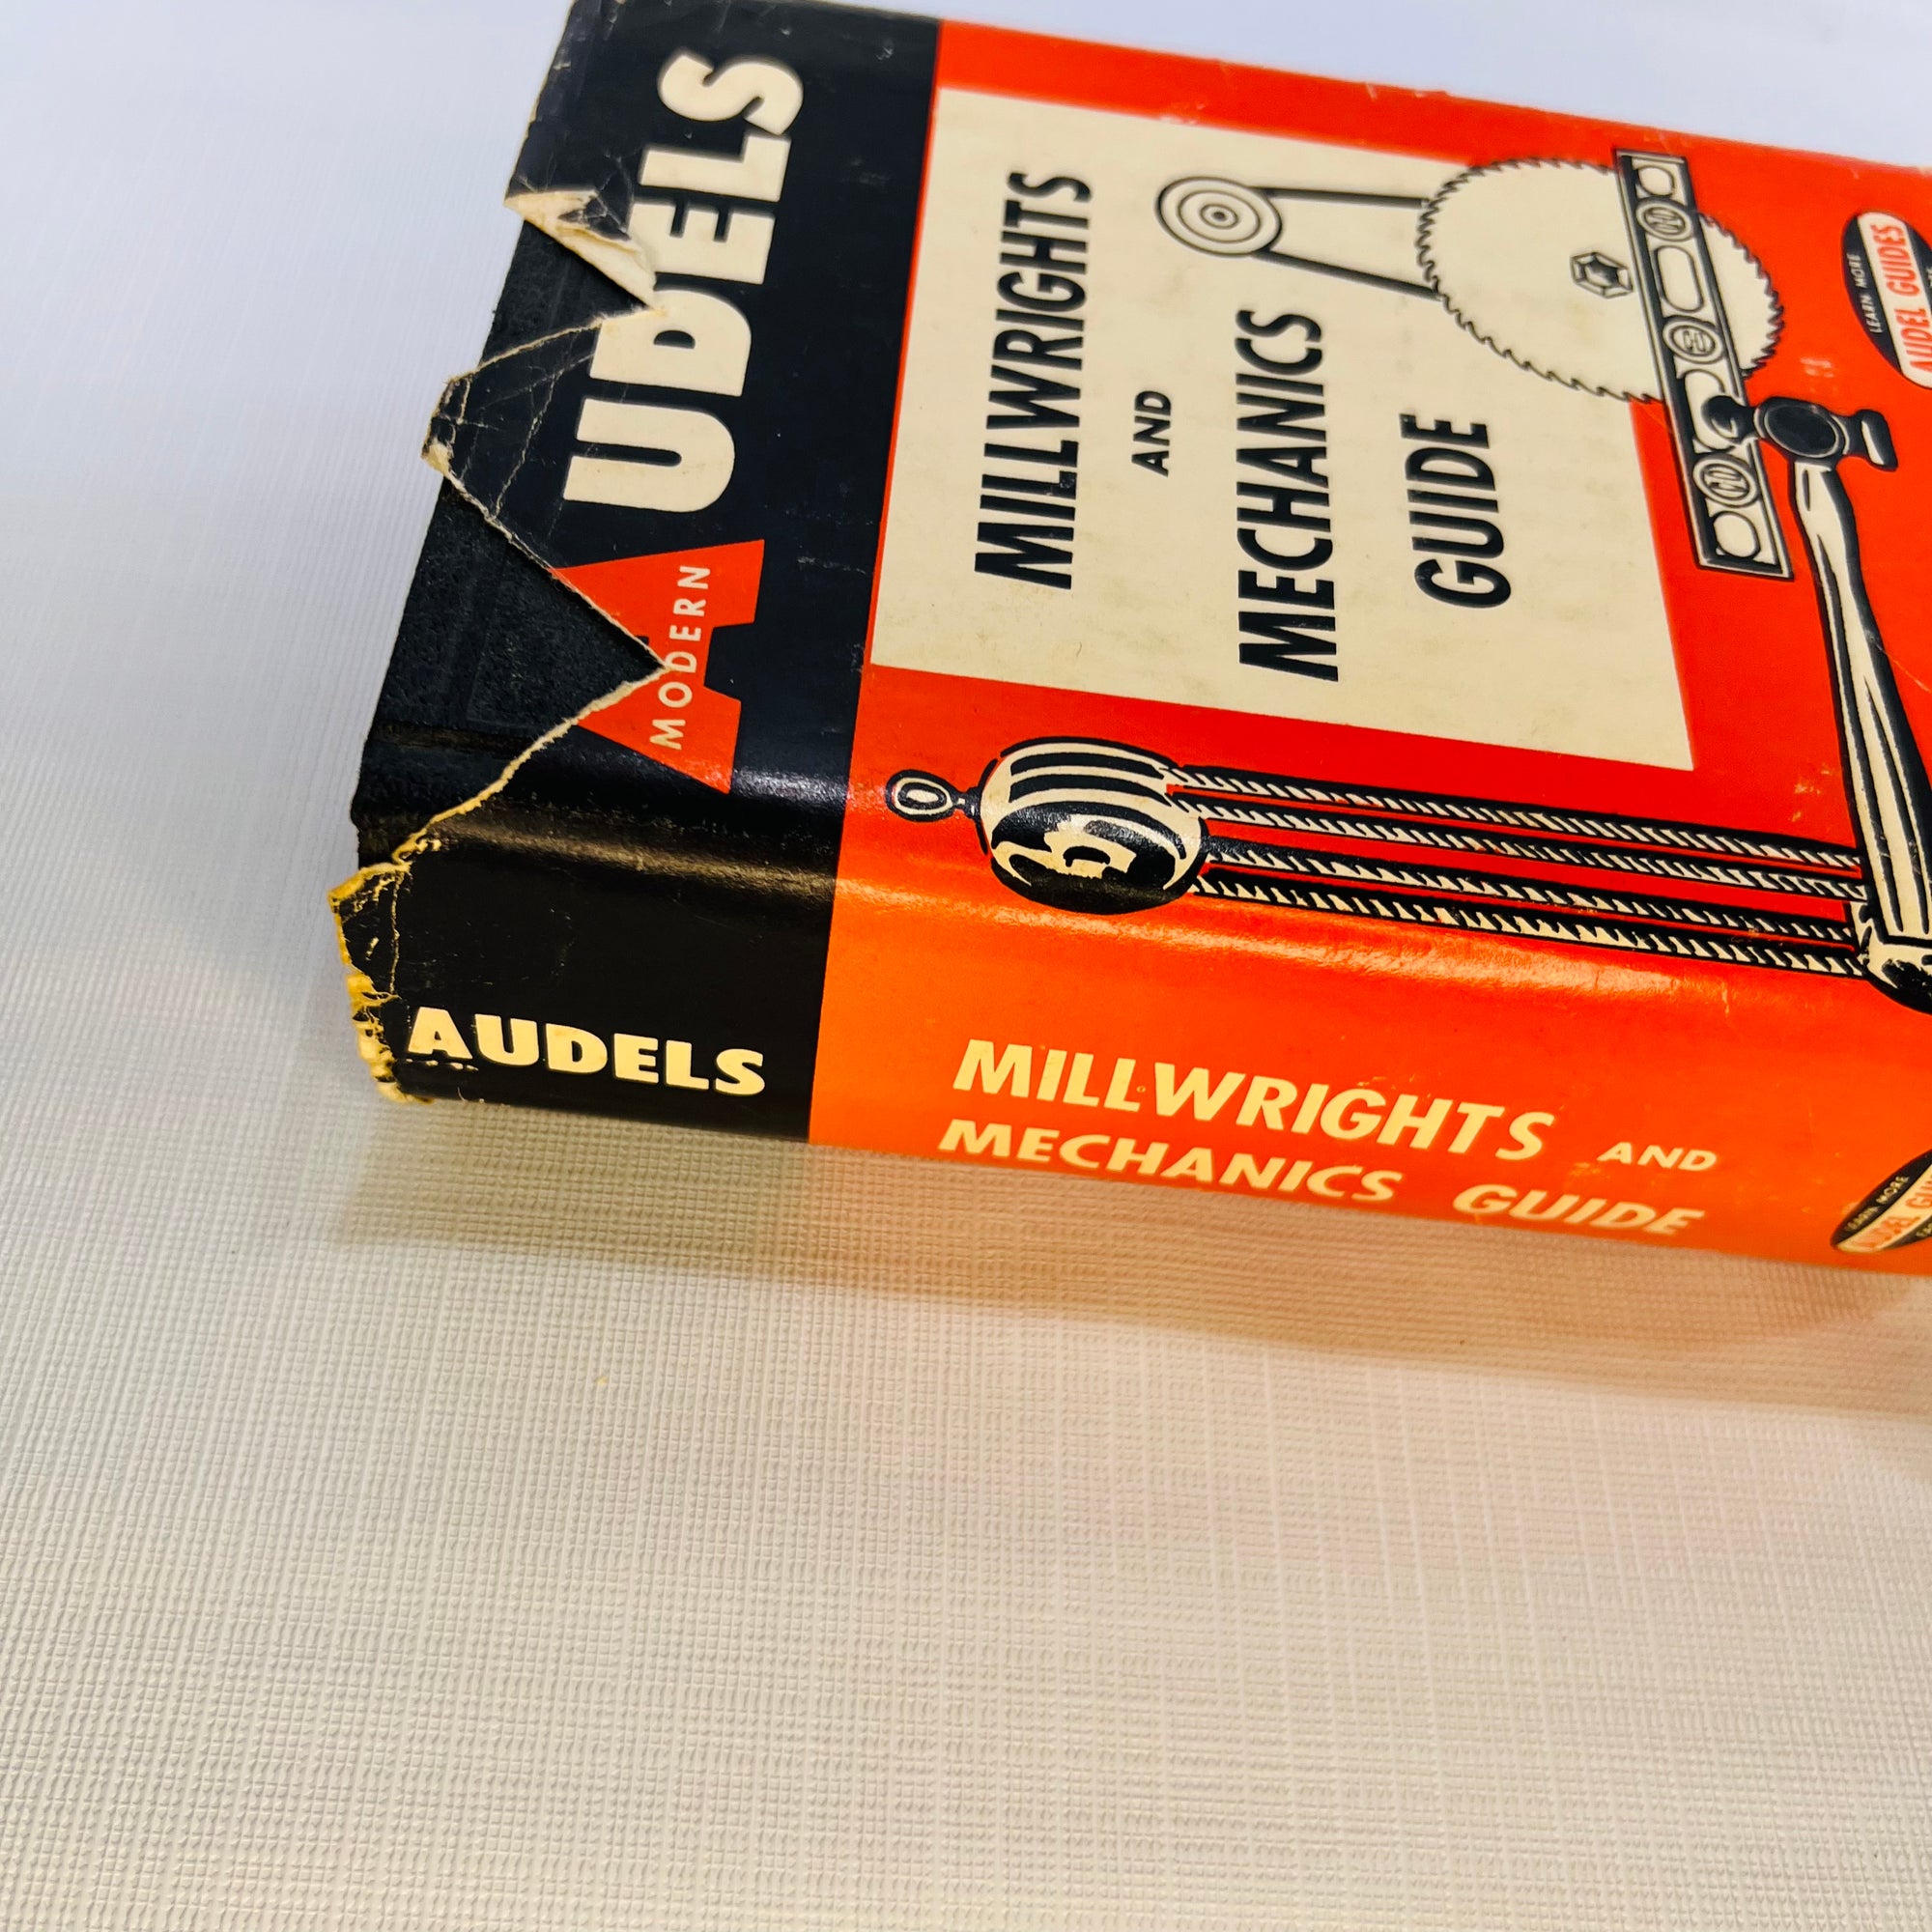 Audels Millwrights and Mechanics Guide by E.P. Anderson 1960 Theo. Audel & Co. Publishers